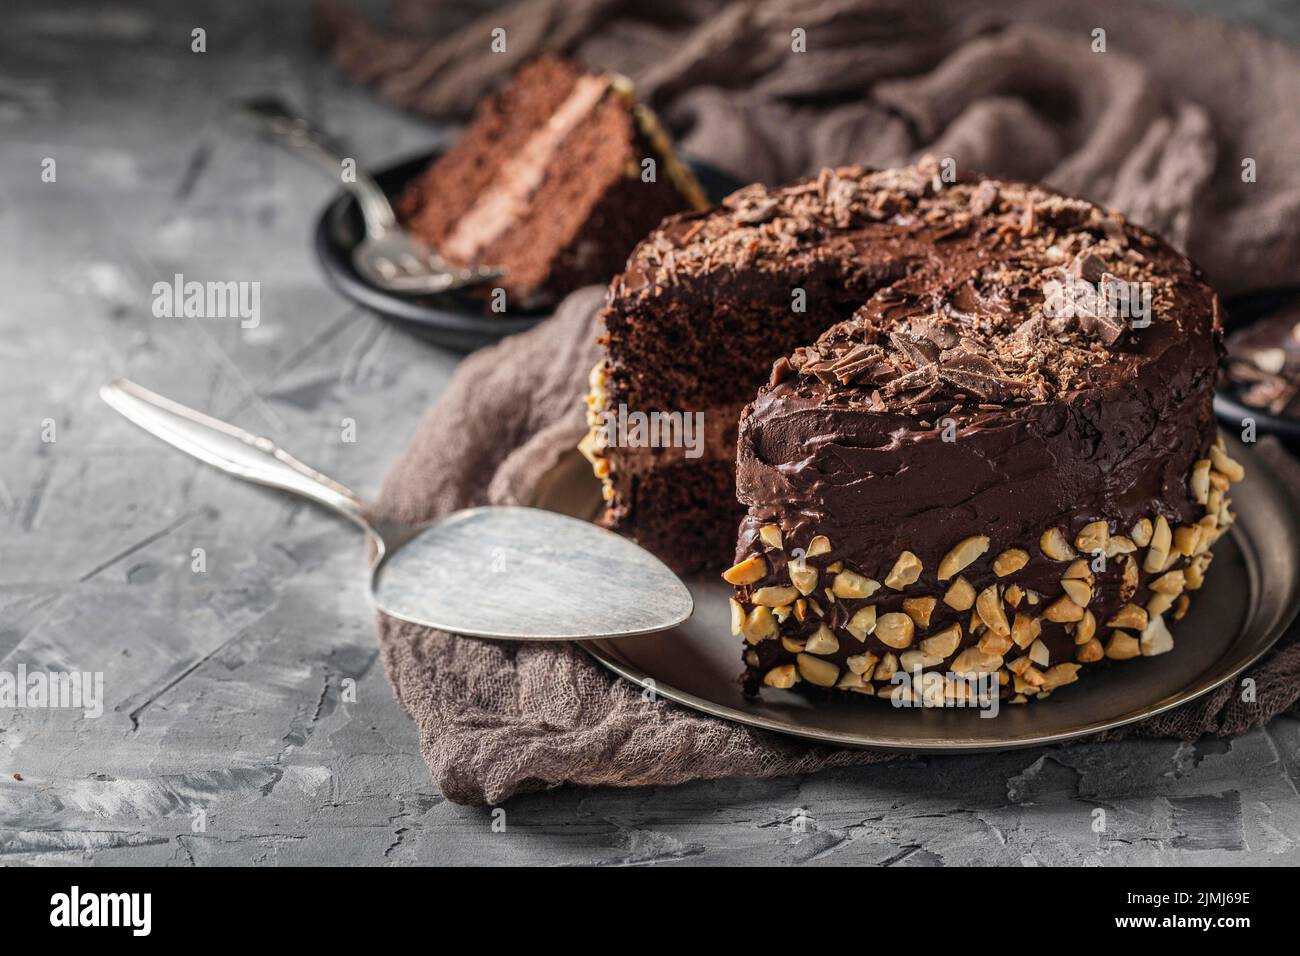 Front view delicious cake concept Stock Photo